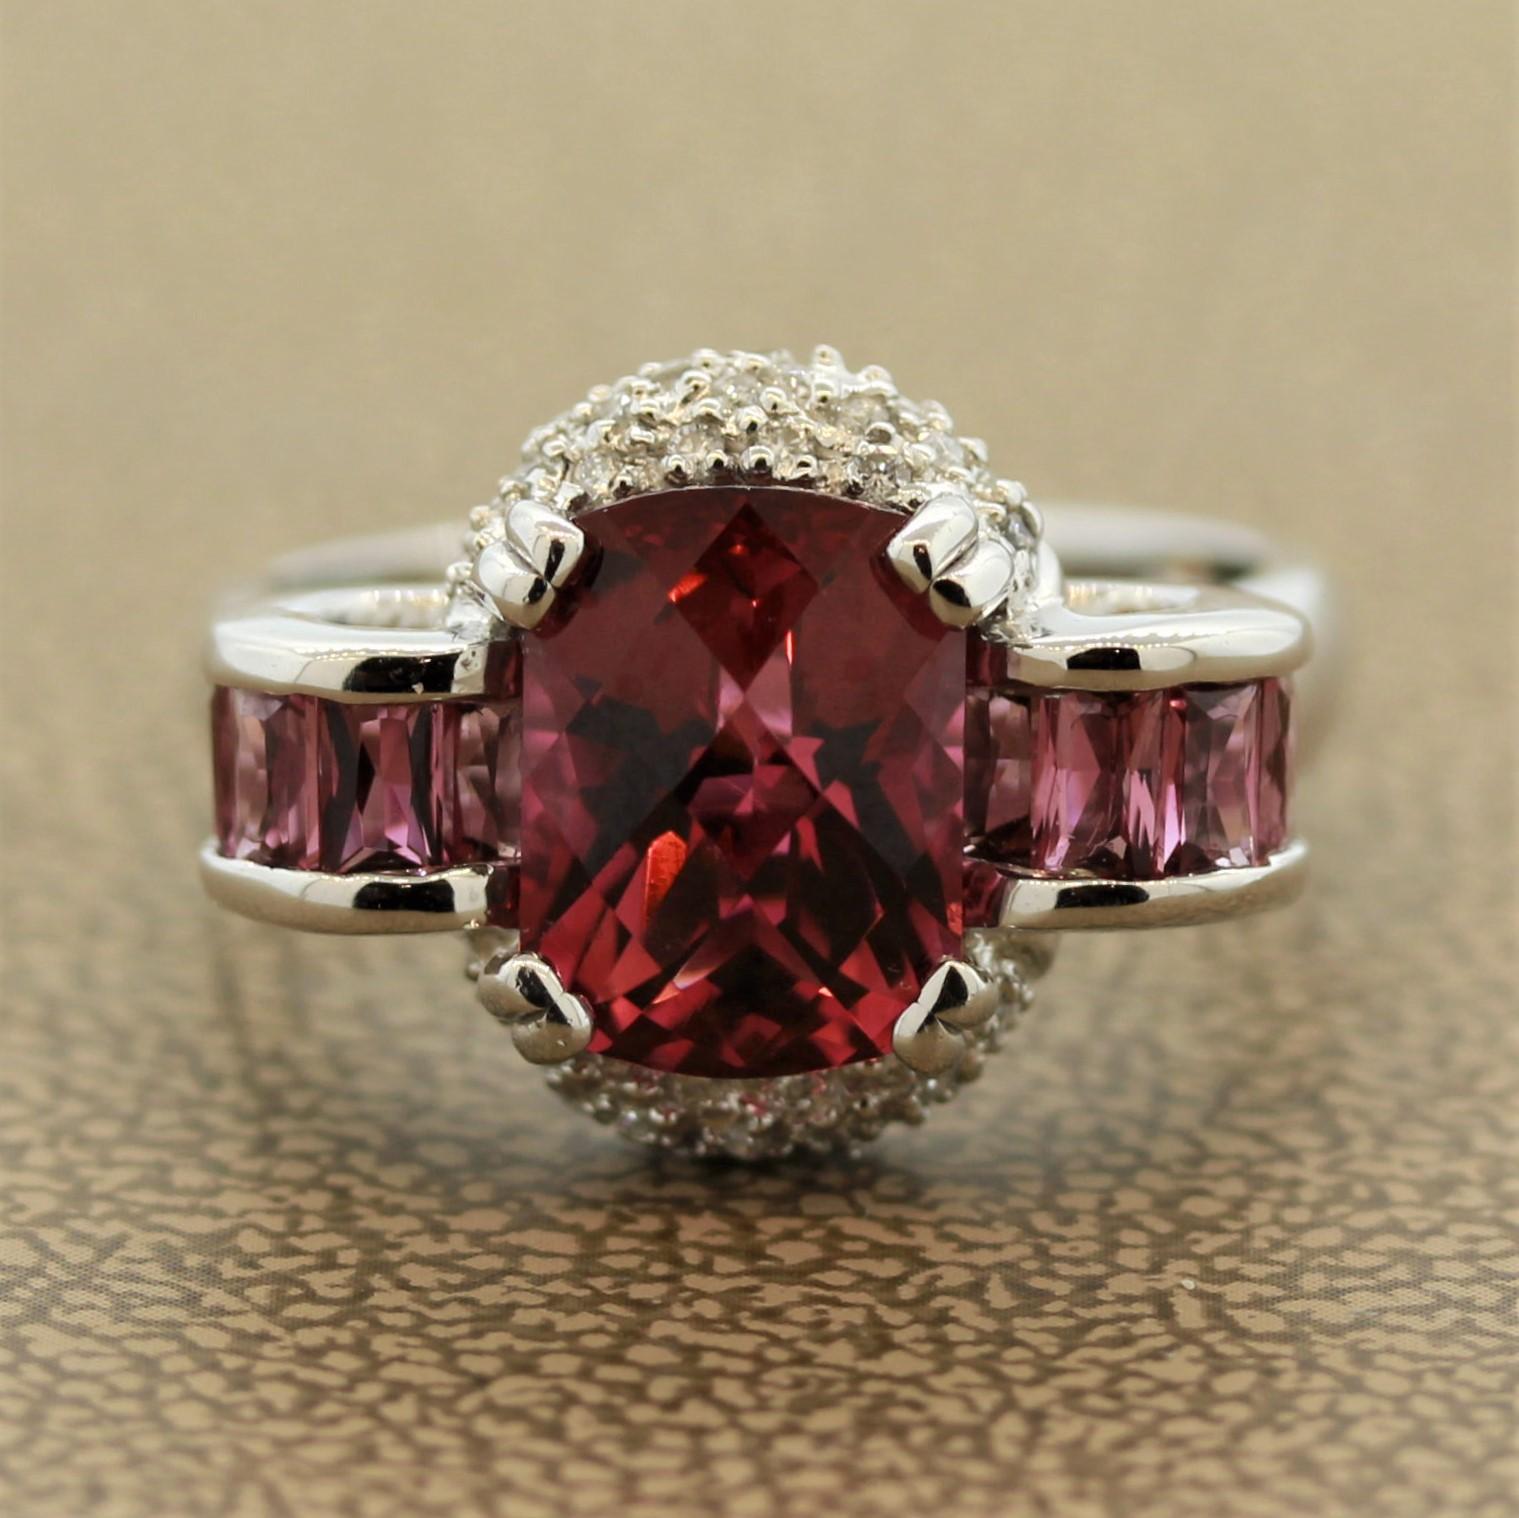 An original piece from Italian designer Bellarri. It features a 2.73 carat pink topaz in the center which is accented by smaller pink topaz weighing a total of 1.36 carats and set on its sides. Adding to that are 0.13 carats of round brilliant cut